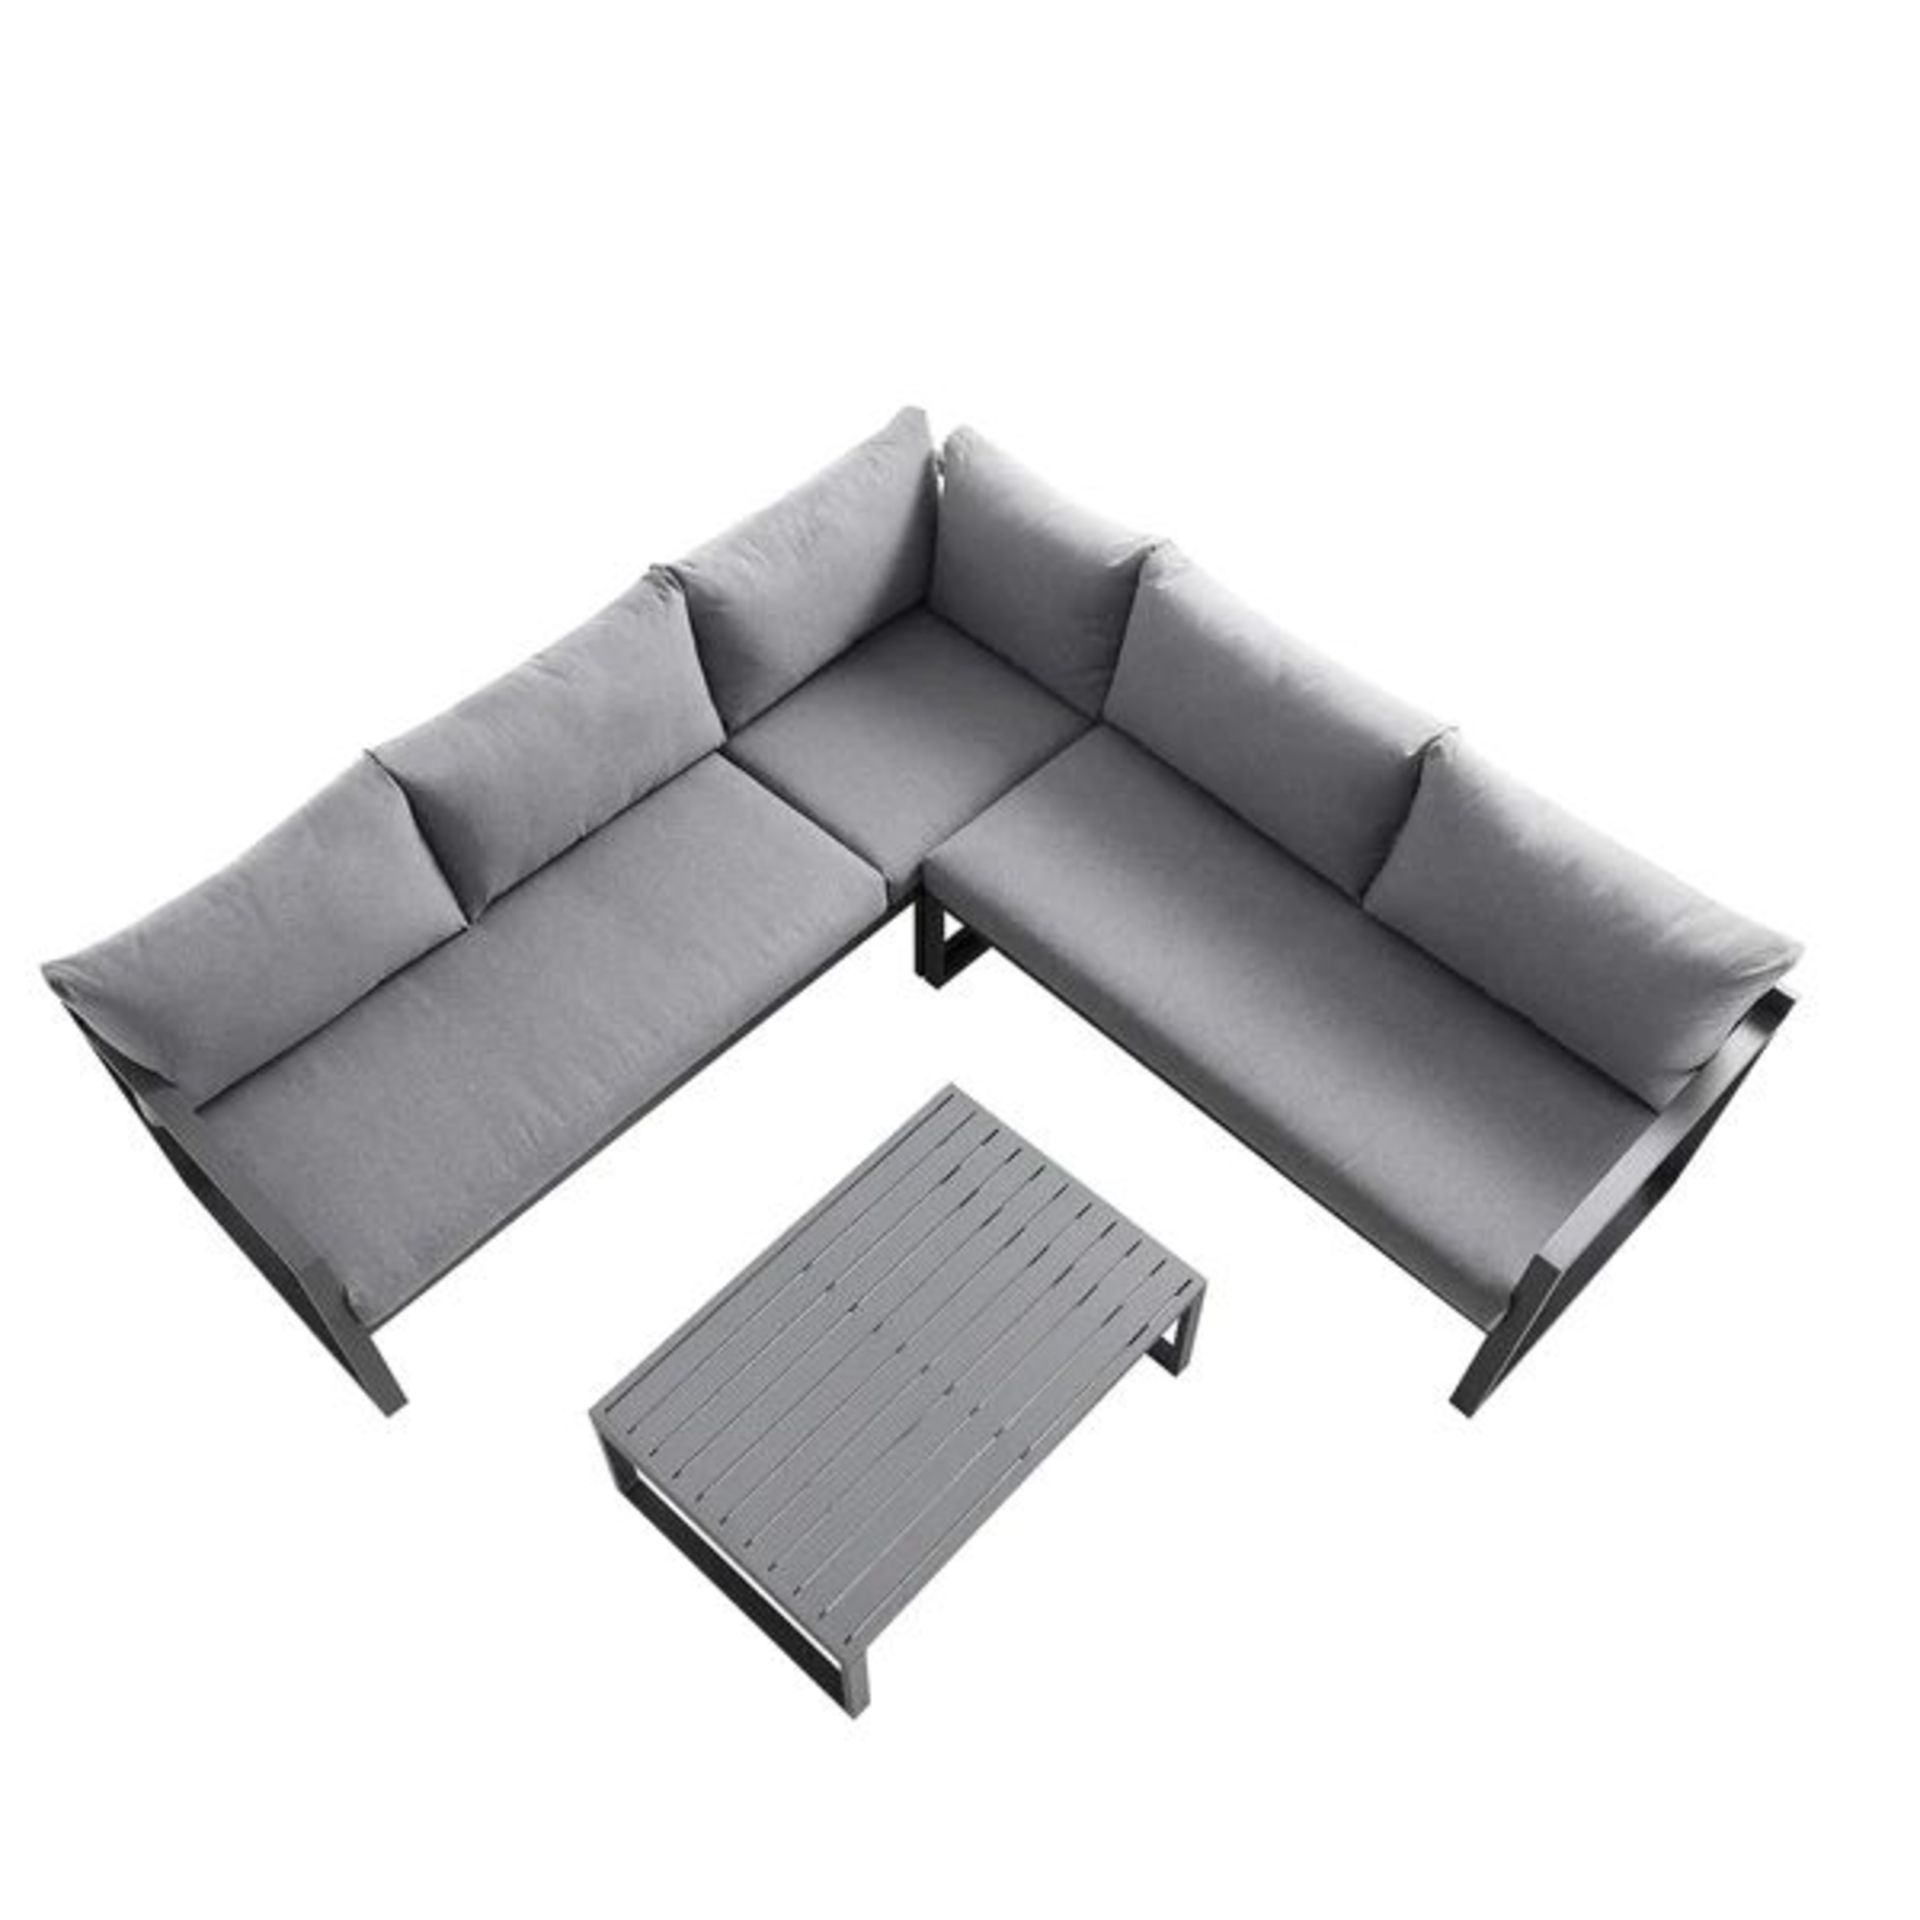 Albany Aluminium Corner Sofa Set with Reclining Back and Coffee Table, Grey. - R14. RRP £959.99. - Image 2 of 2